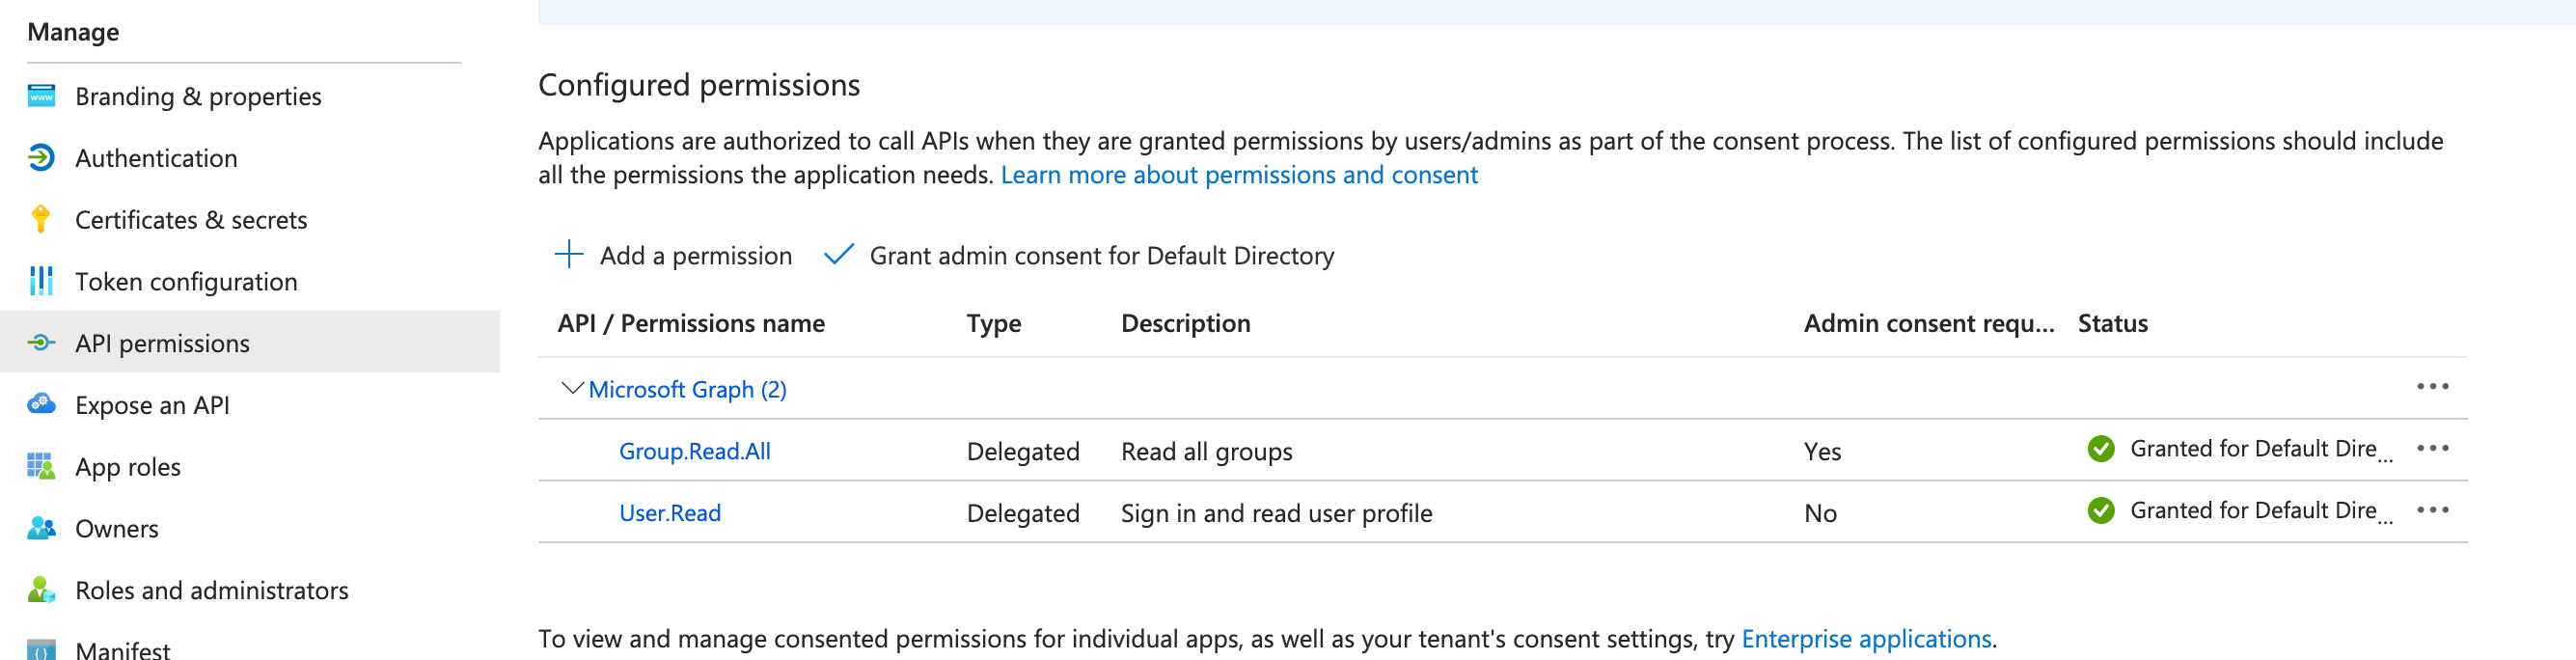 Screenshot of Microsoft Azure Console showing how to check an application API Permissions